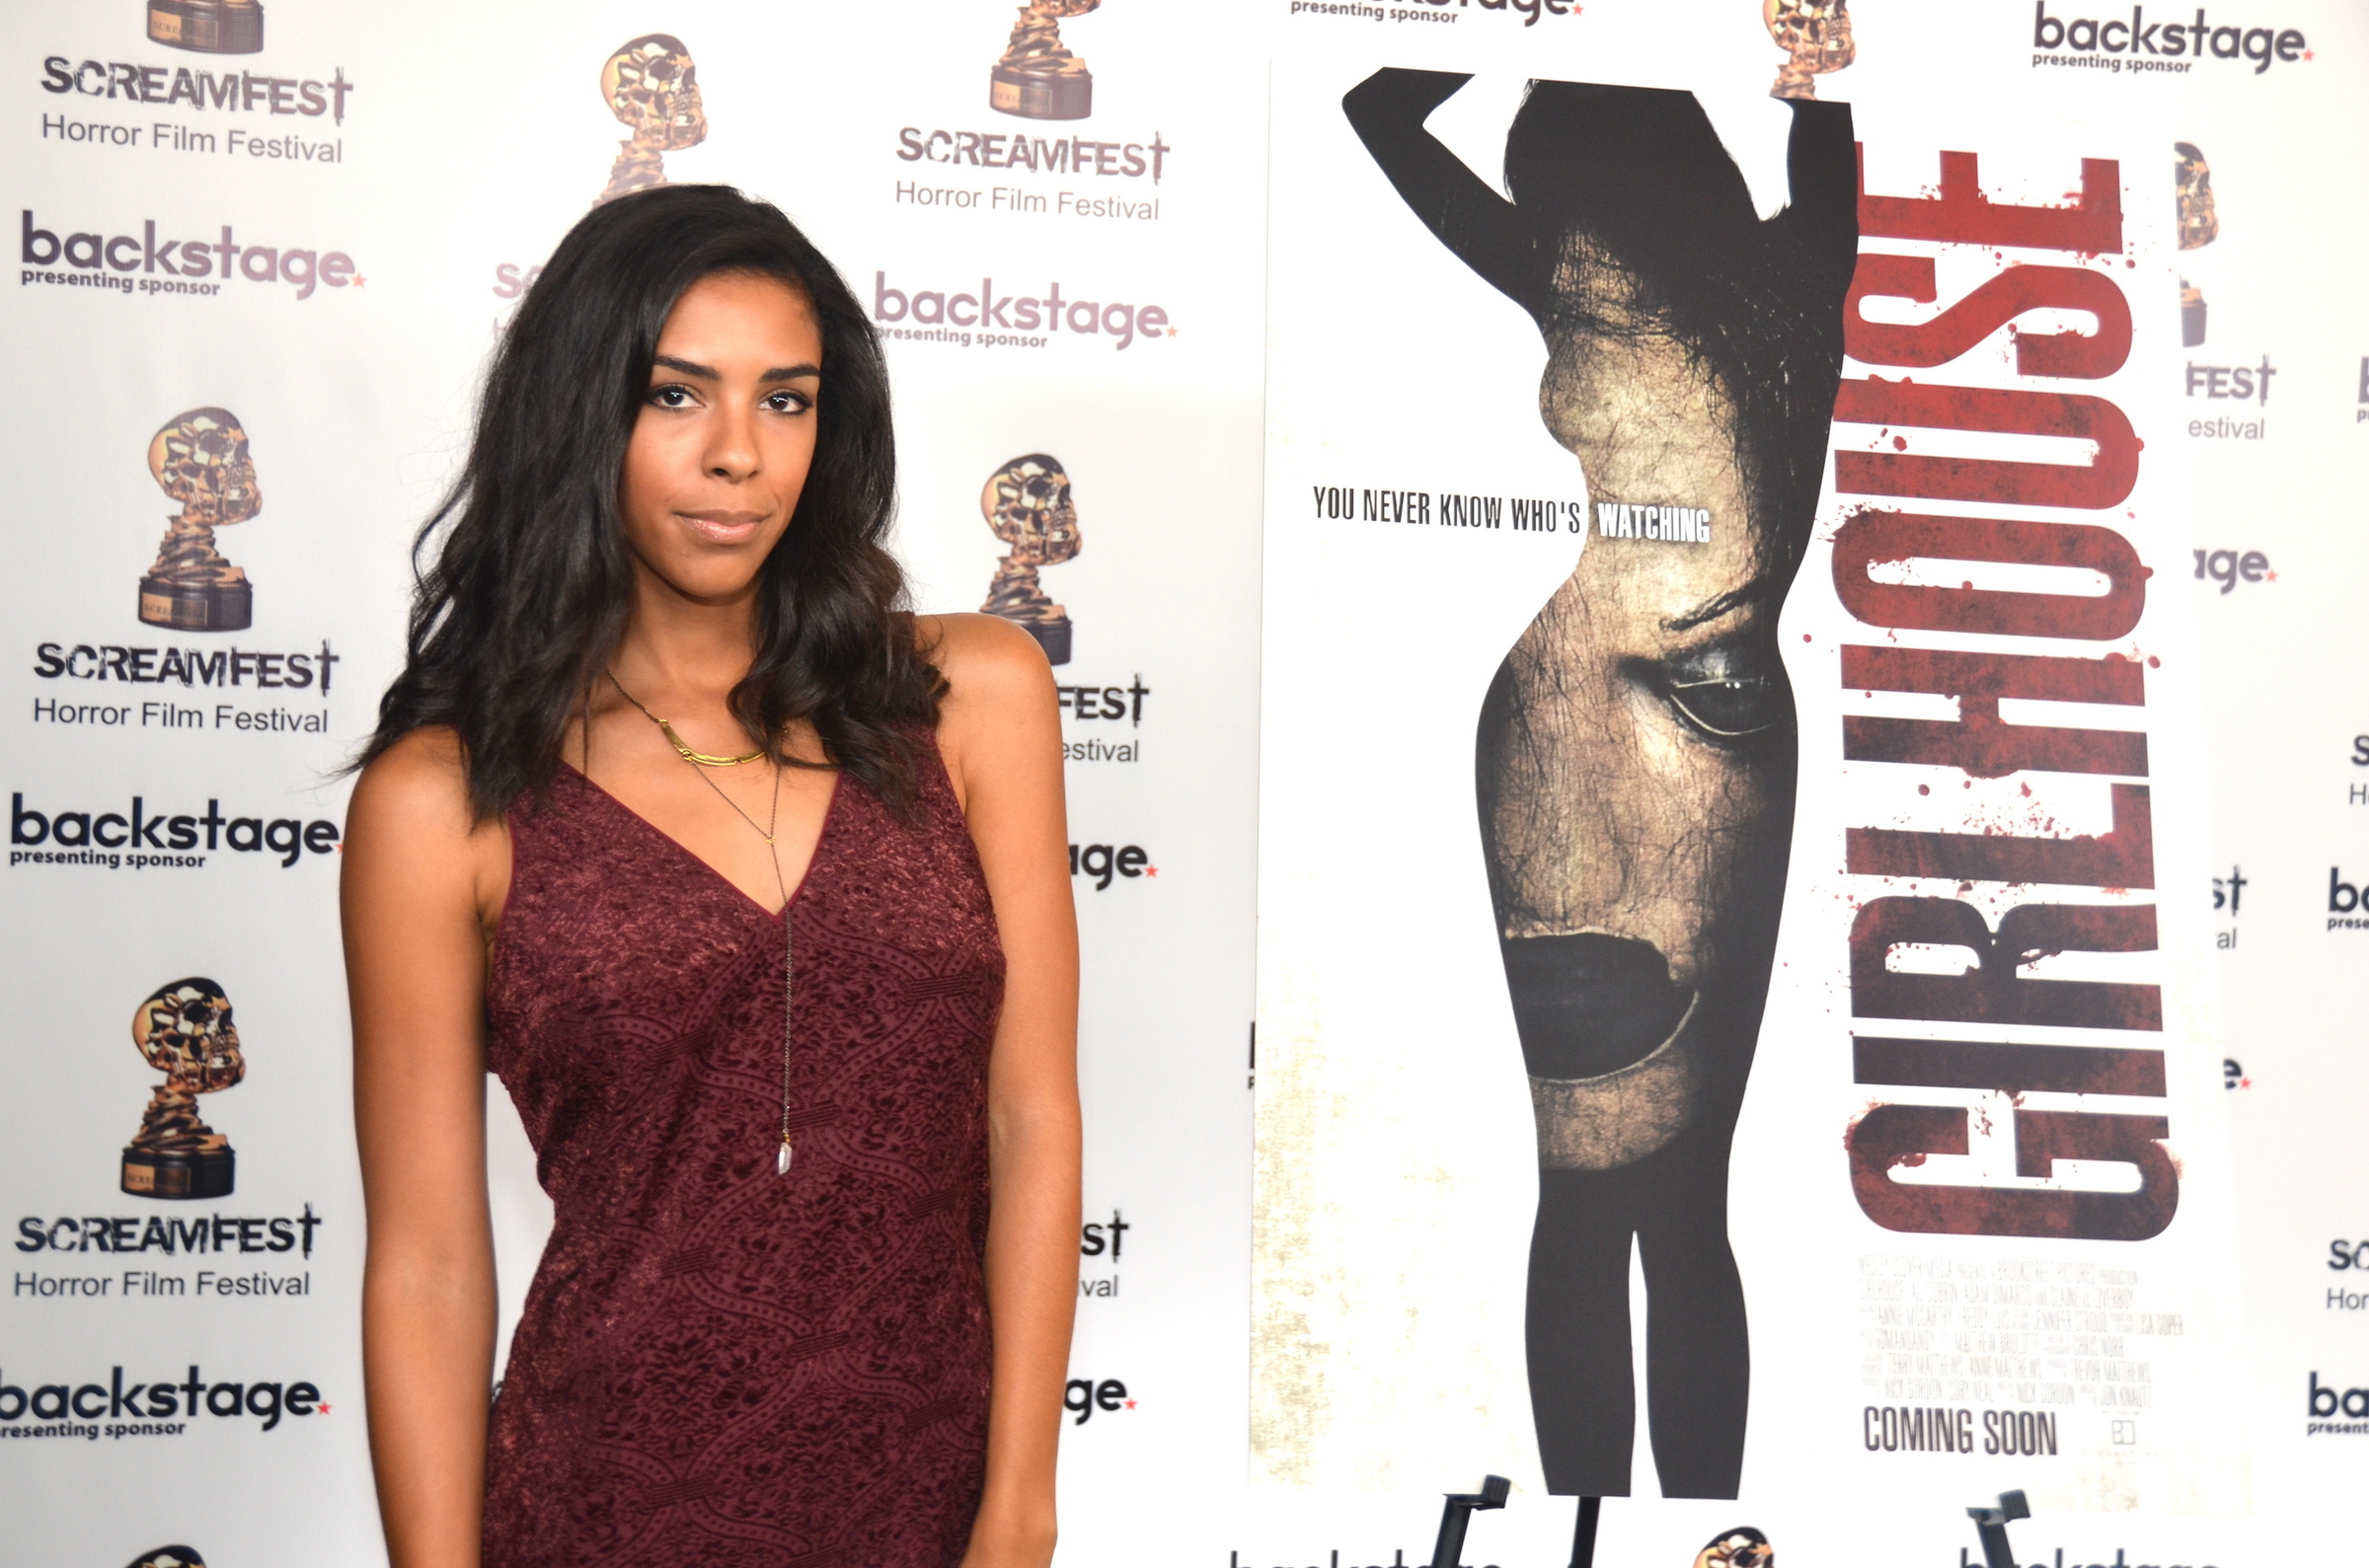 Attending Premiere of Girlhouse at Screamfest, Los Angeles